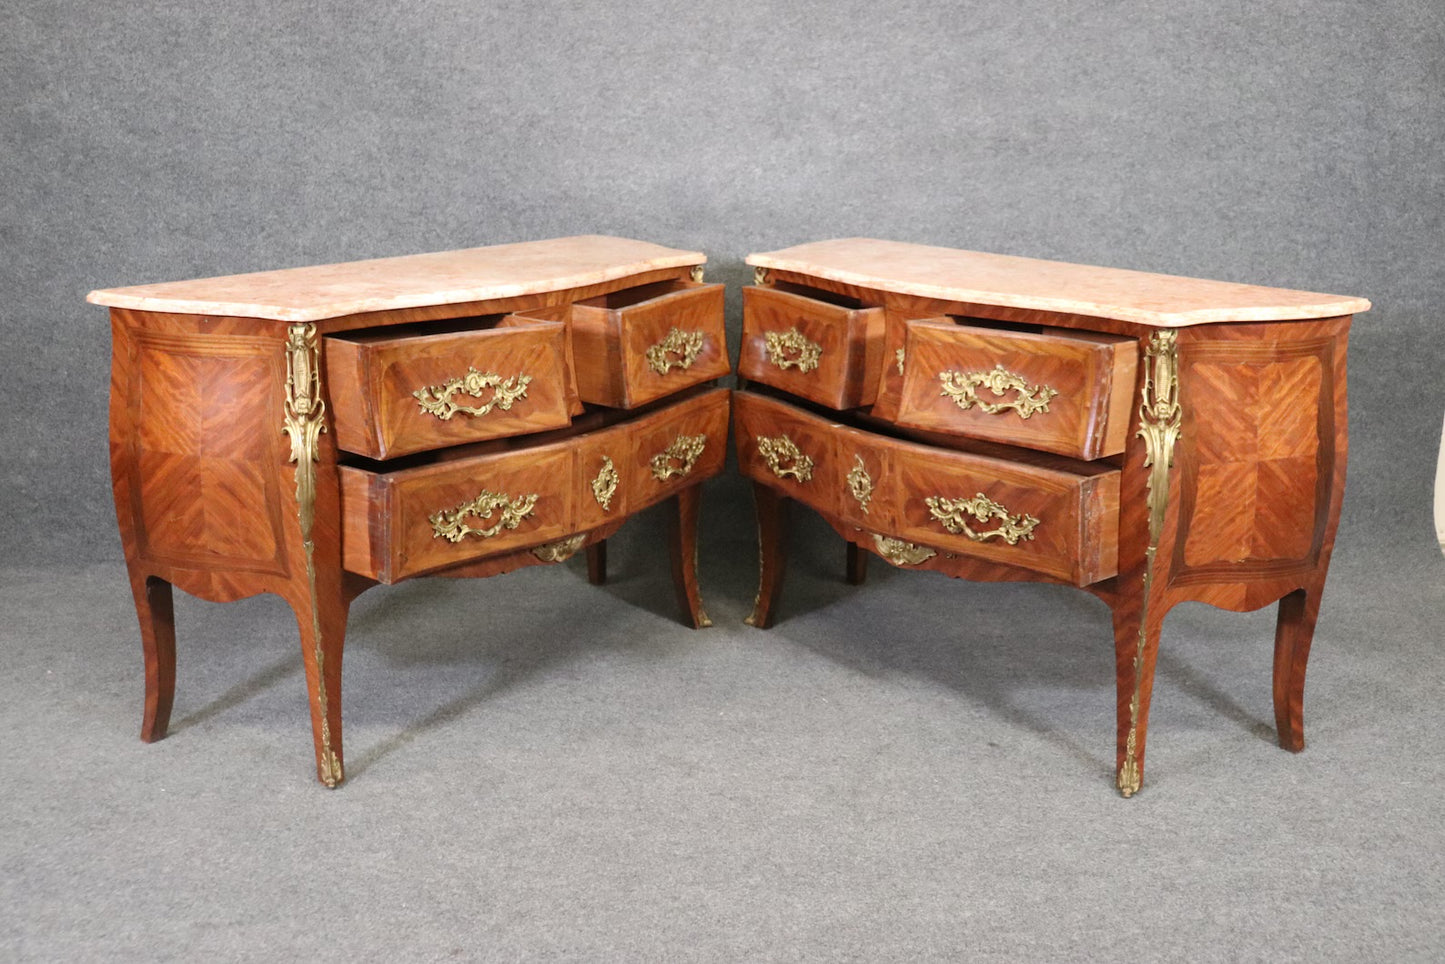 Antique Pair of Louis XV Rococo Style French Inlaid Marble Top Commodes Lot#93300